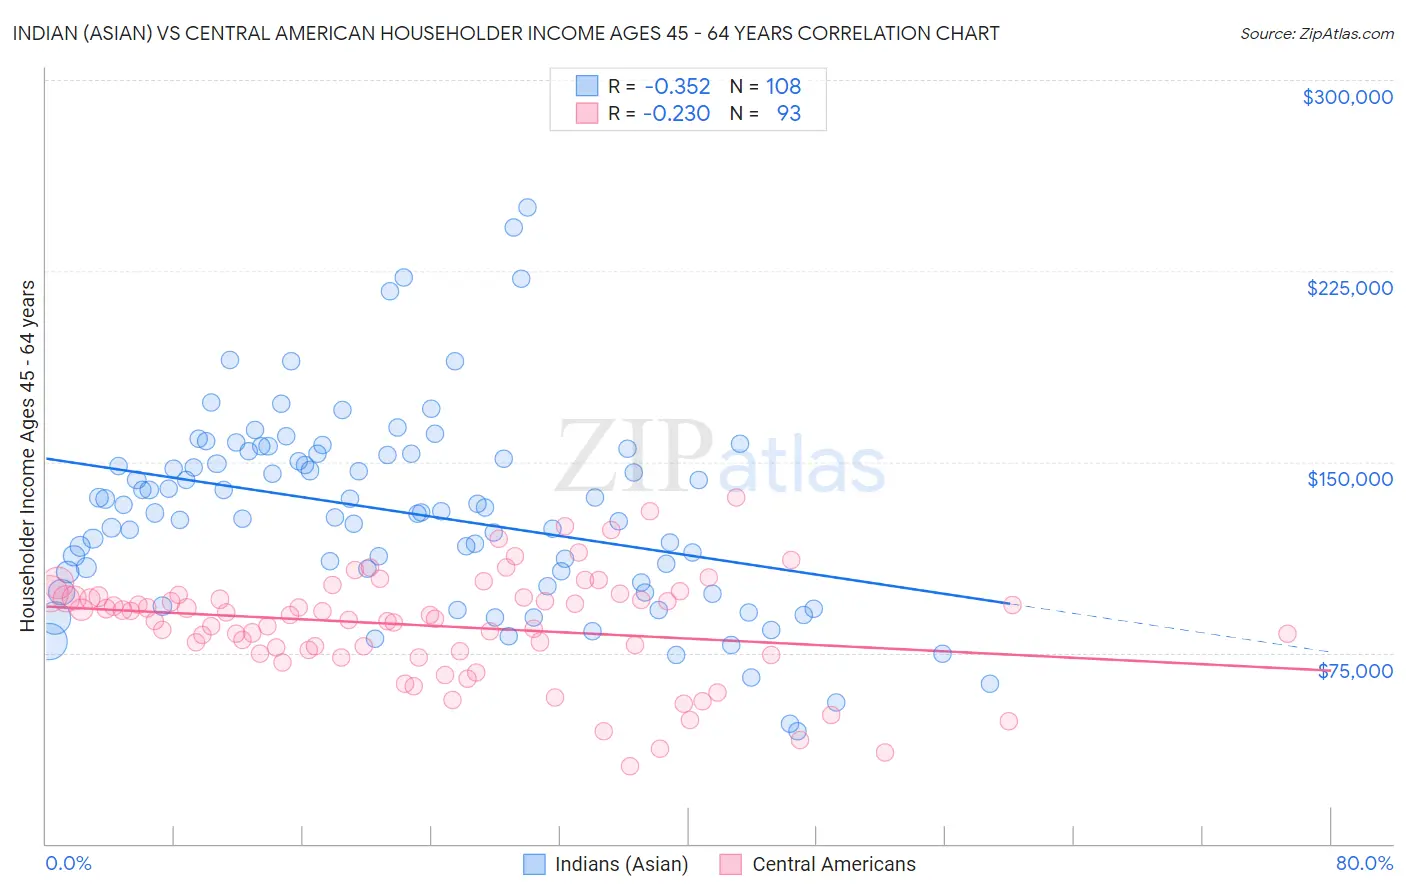 Indian (Asian) vs Central American Householder Income Ages 45 - 64 years